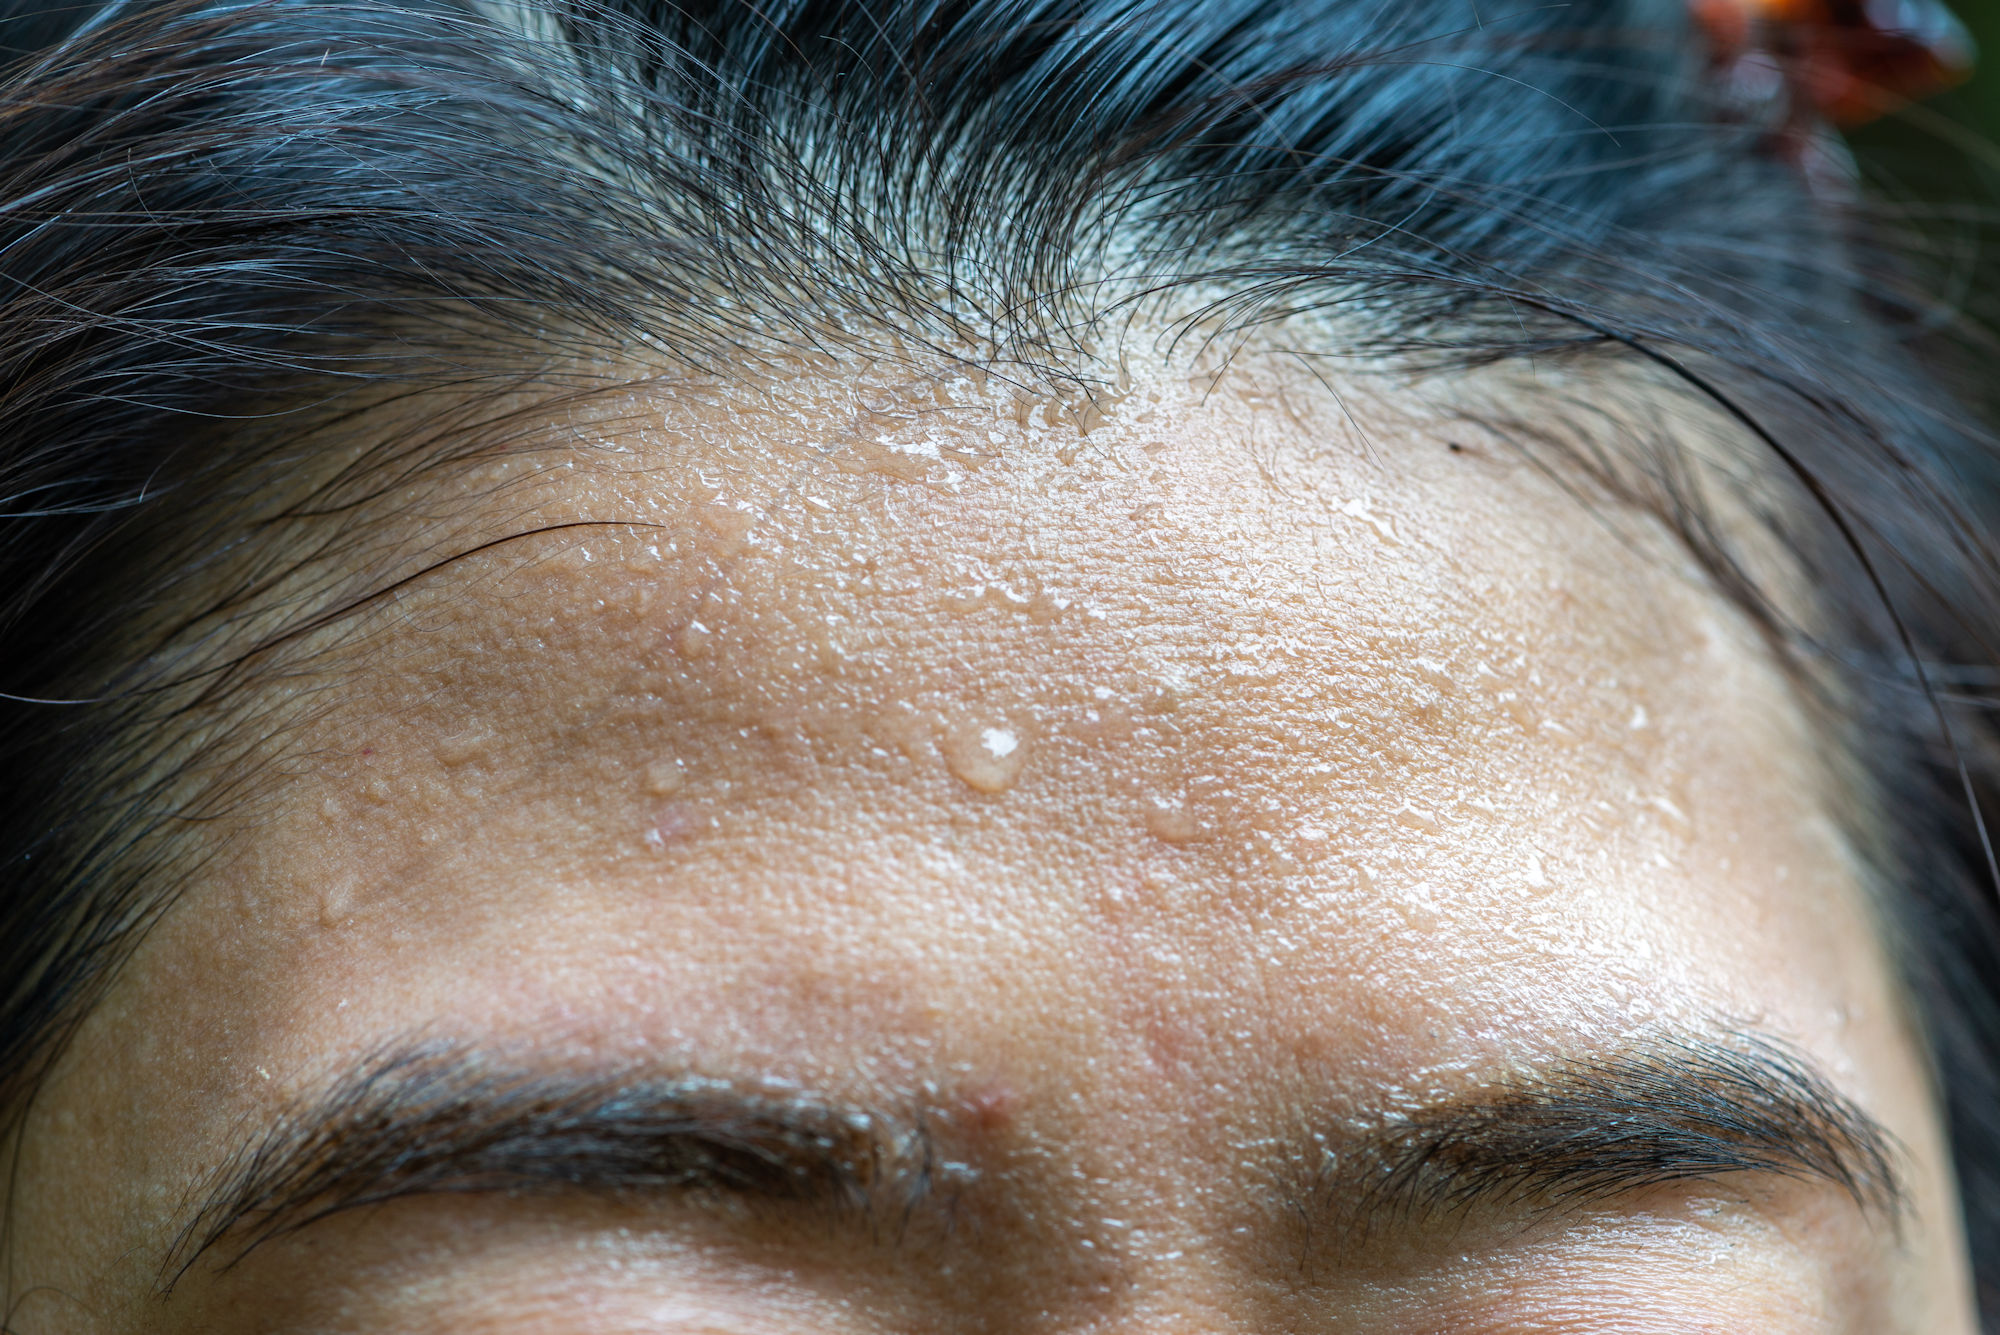 Hyperhidrosis facialis - excessive sweating in the facial area